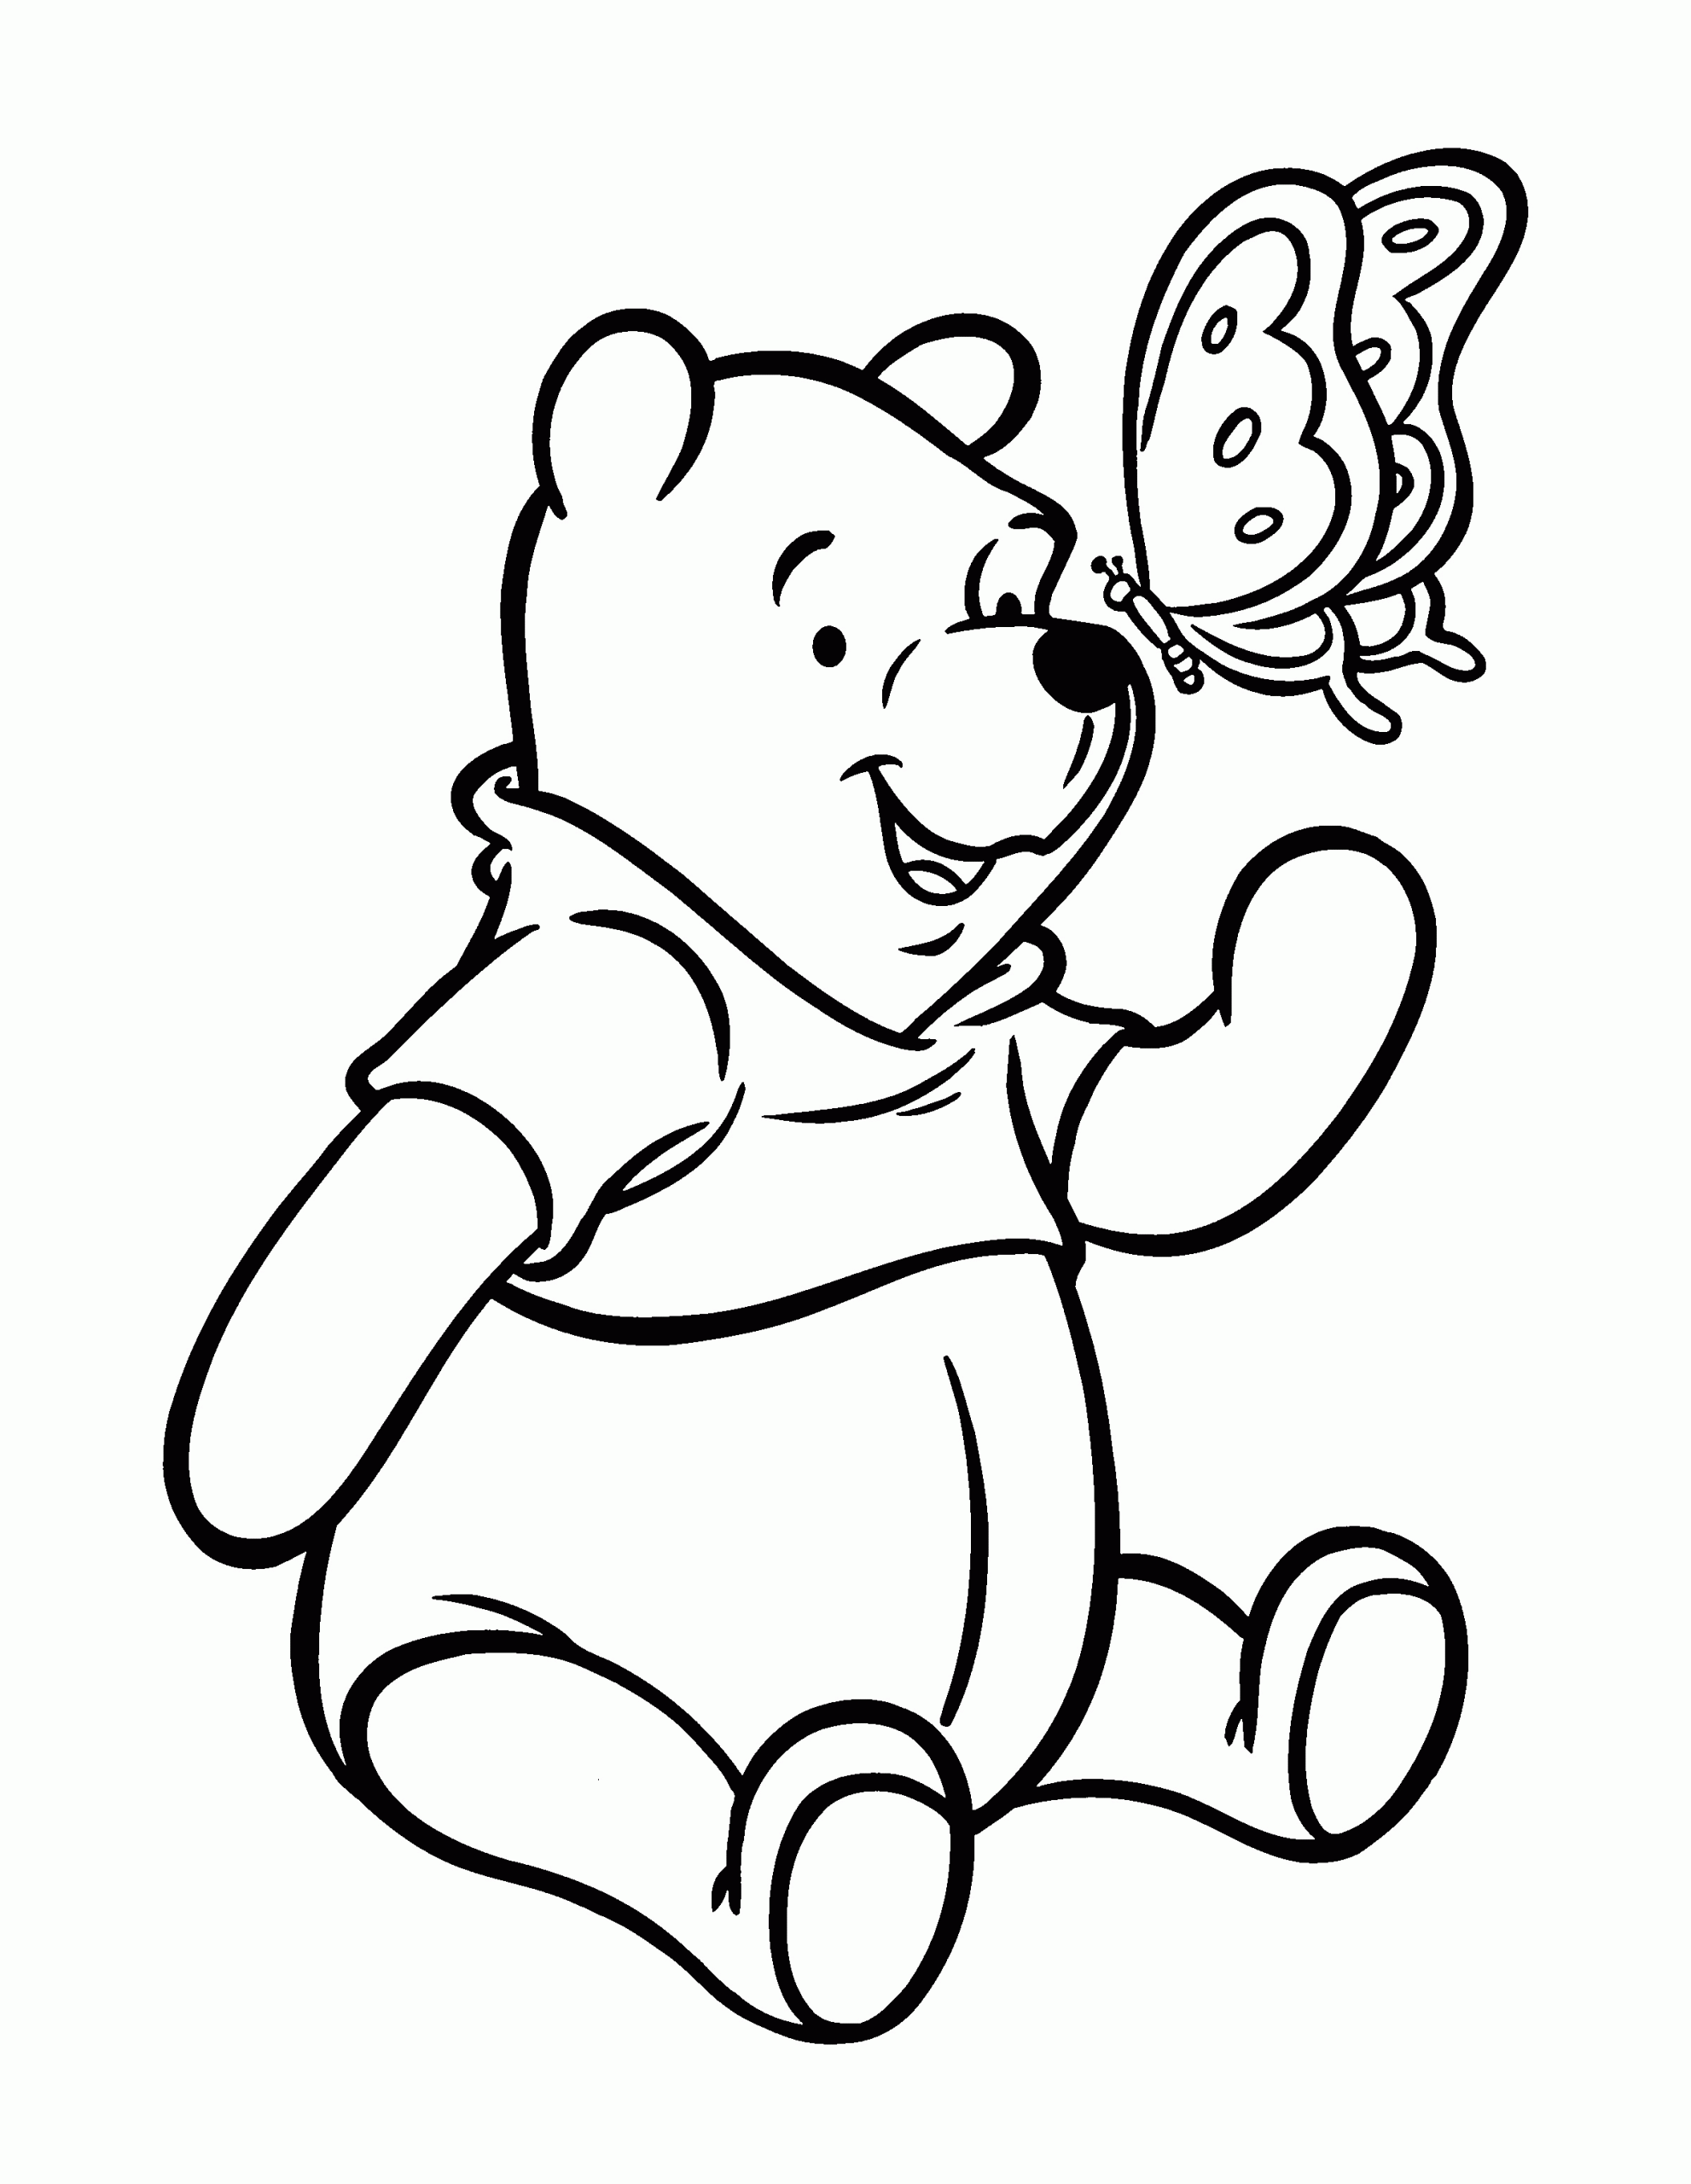 Winnie The Pooh Printable Coloring Pages
 Free Printable Winnie The Pooh Coloring Pages For Kids